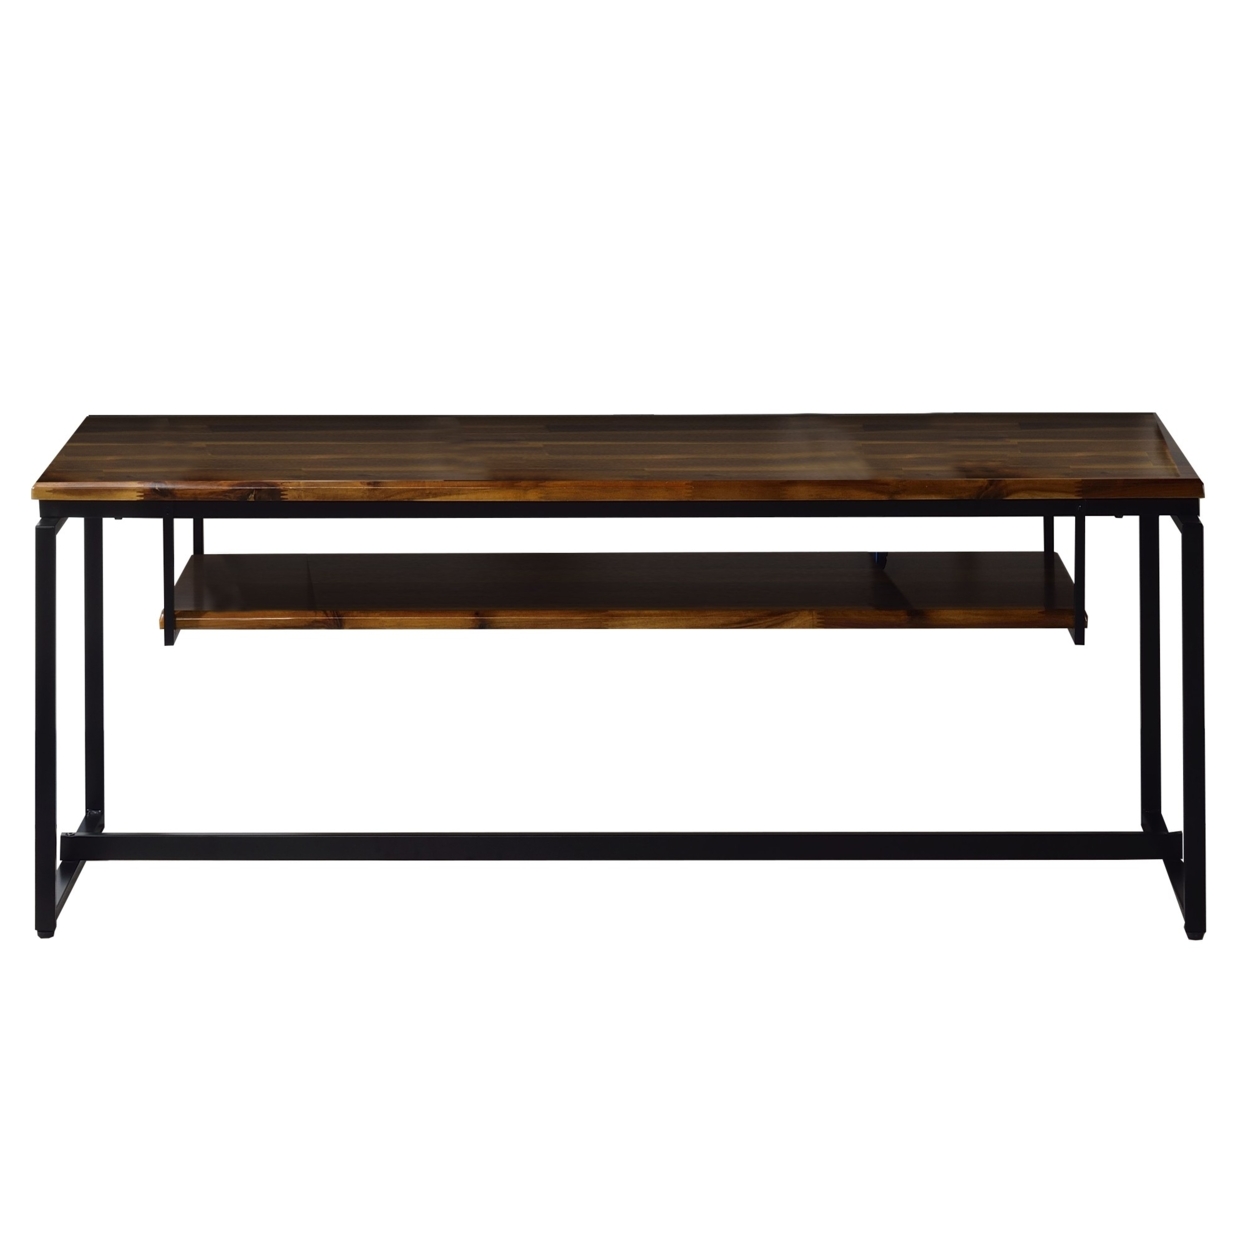 Metal TV Stand Wooden Tabletop With And Open Shelf, Black And Brown- Saltoro Sherpi